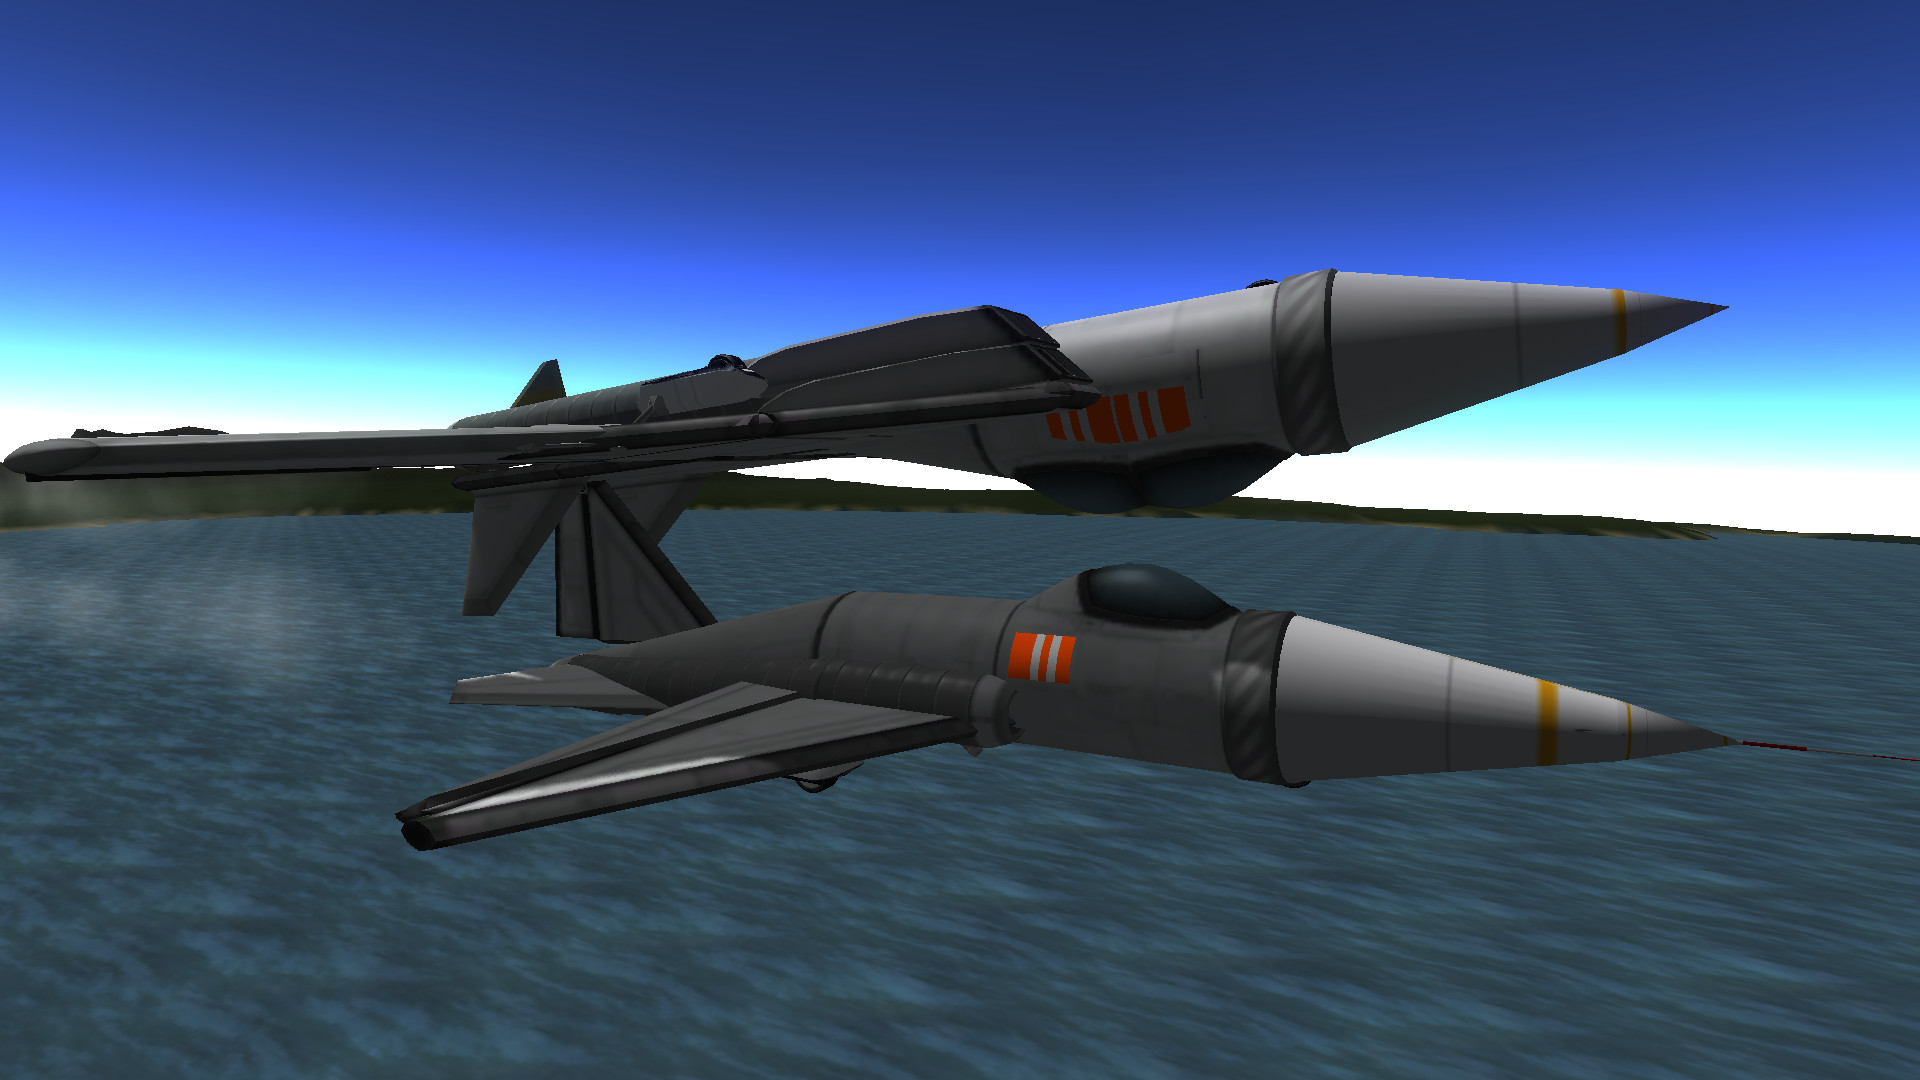 1920x1080 Hello KSP forums, I am back from my hiatus and I would like to present my F-14  Tomcat replica.